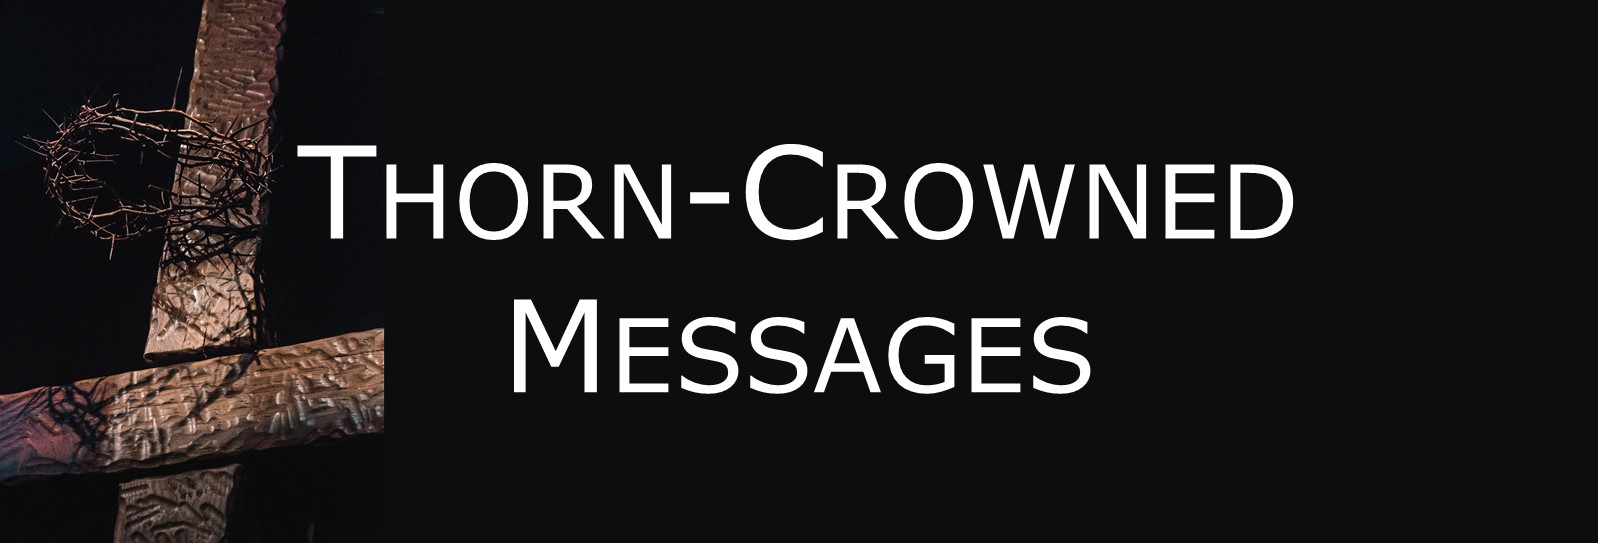 Thorn-Crowned Messages